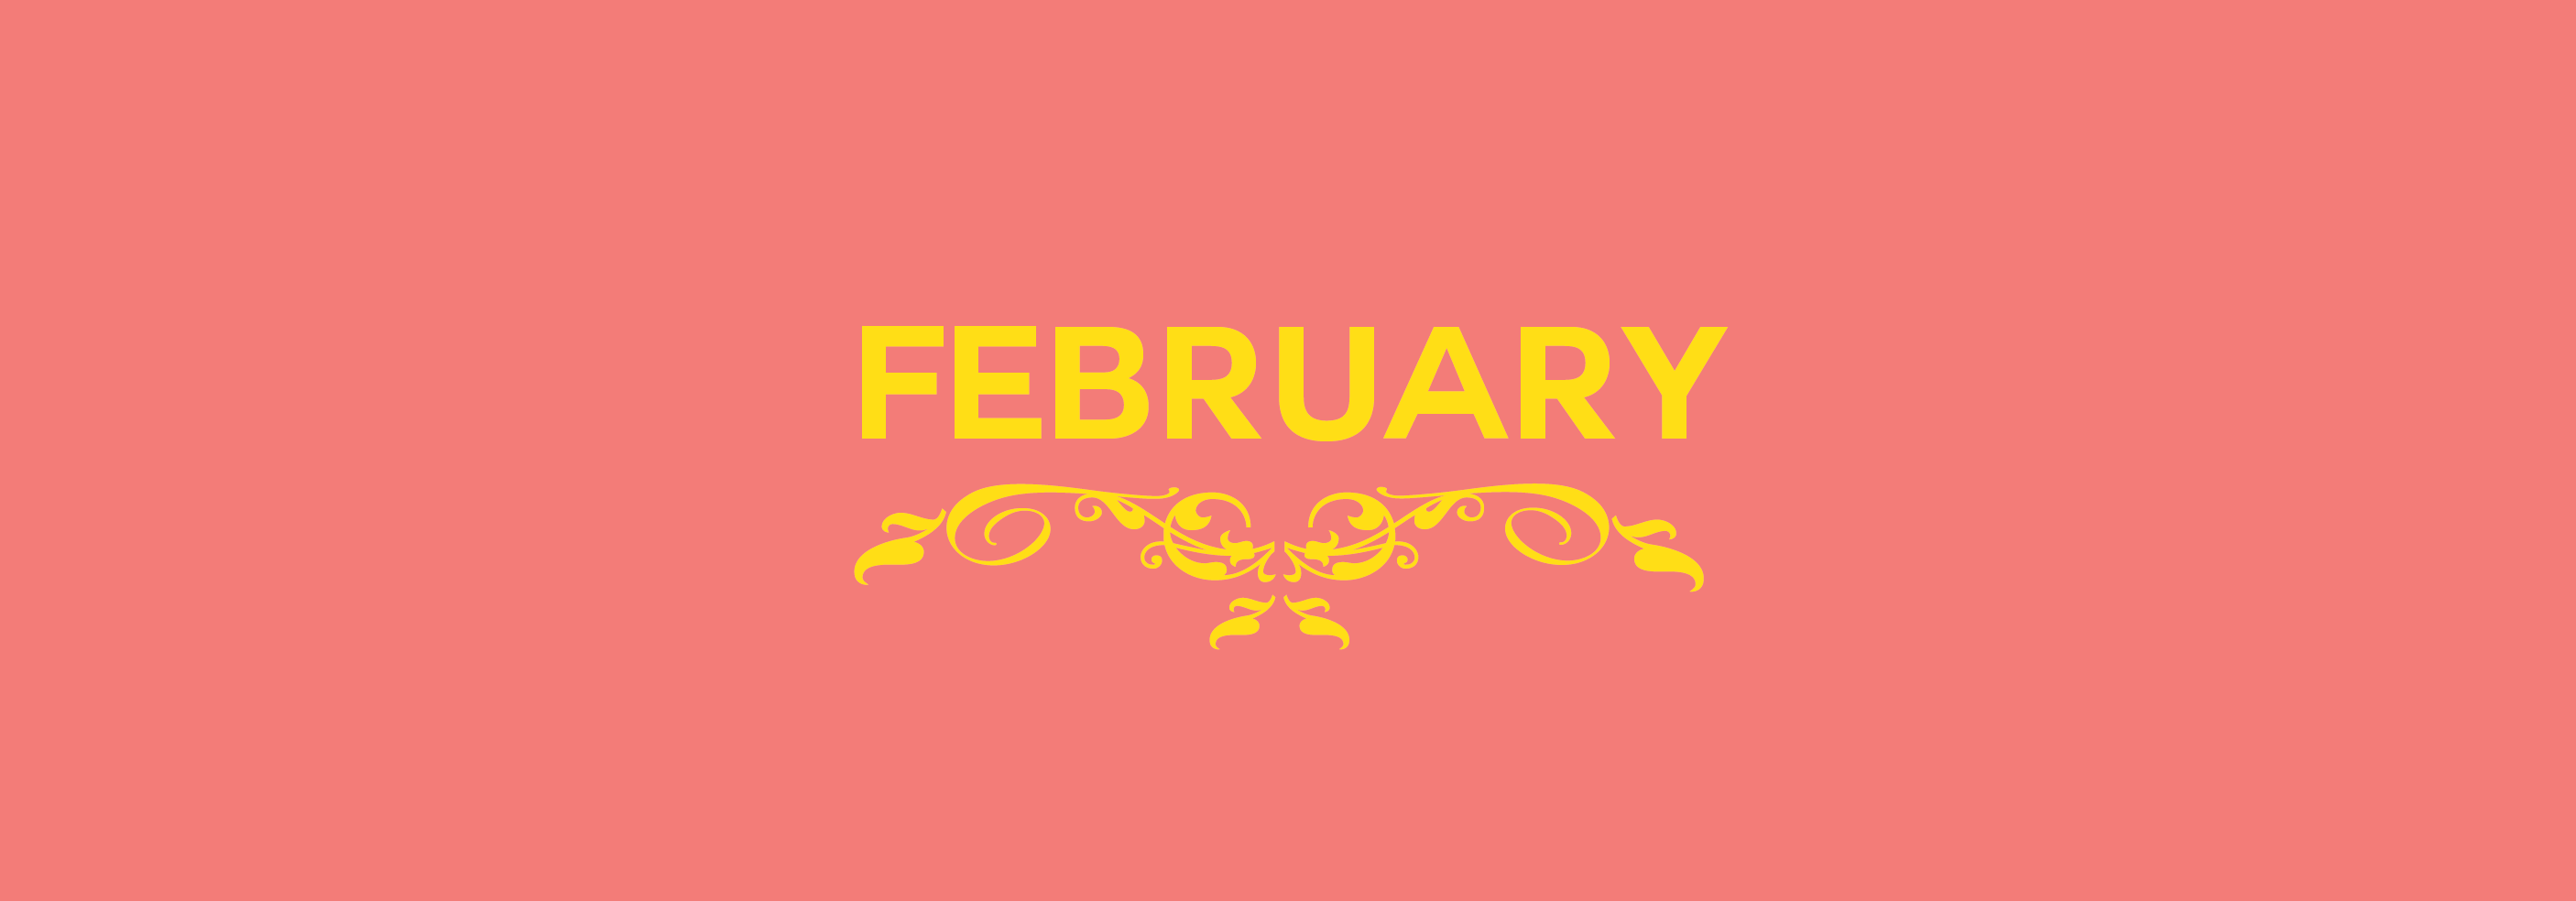 Pink banner with yellow text saying February